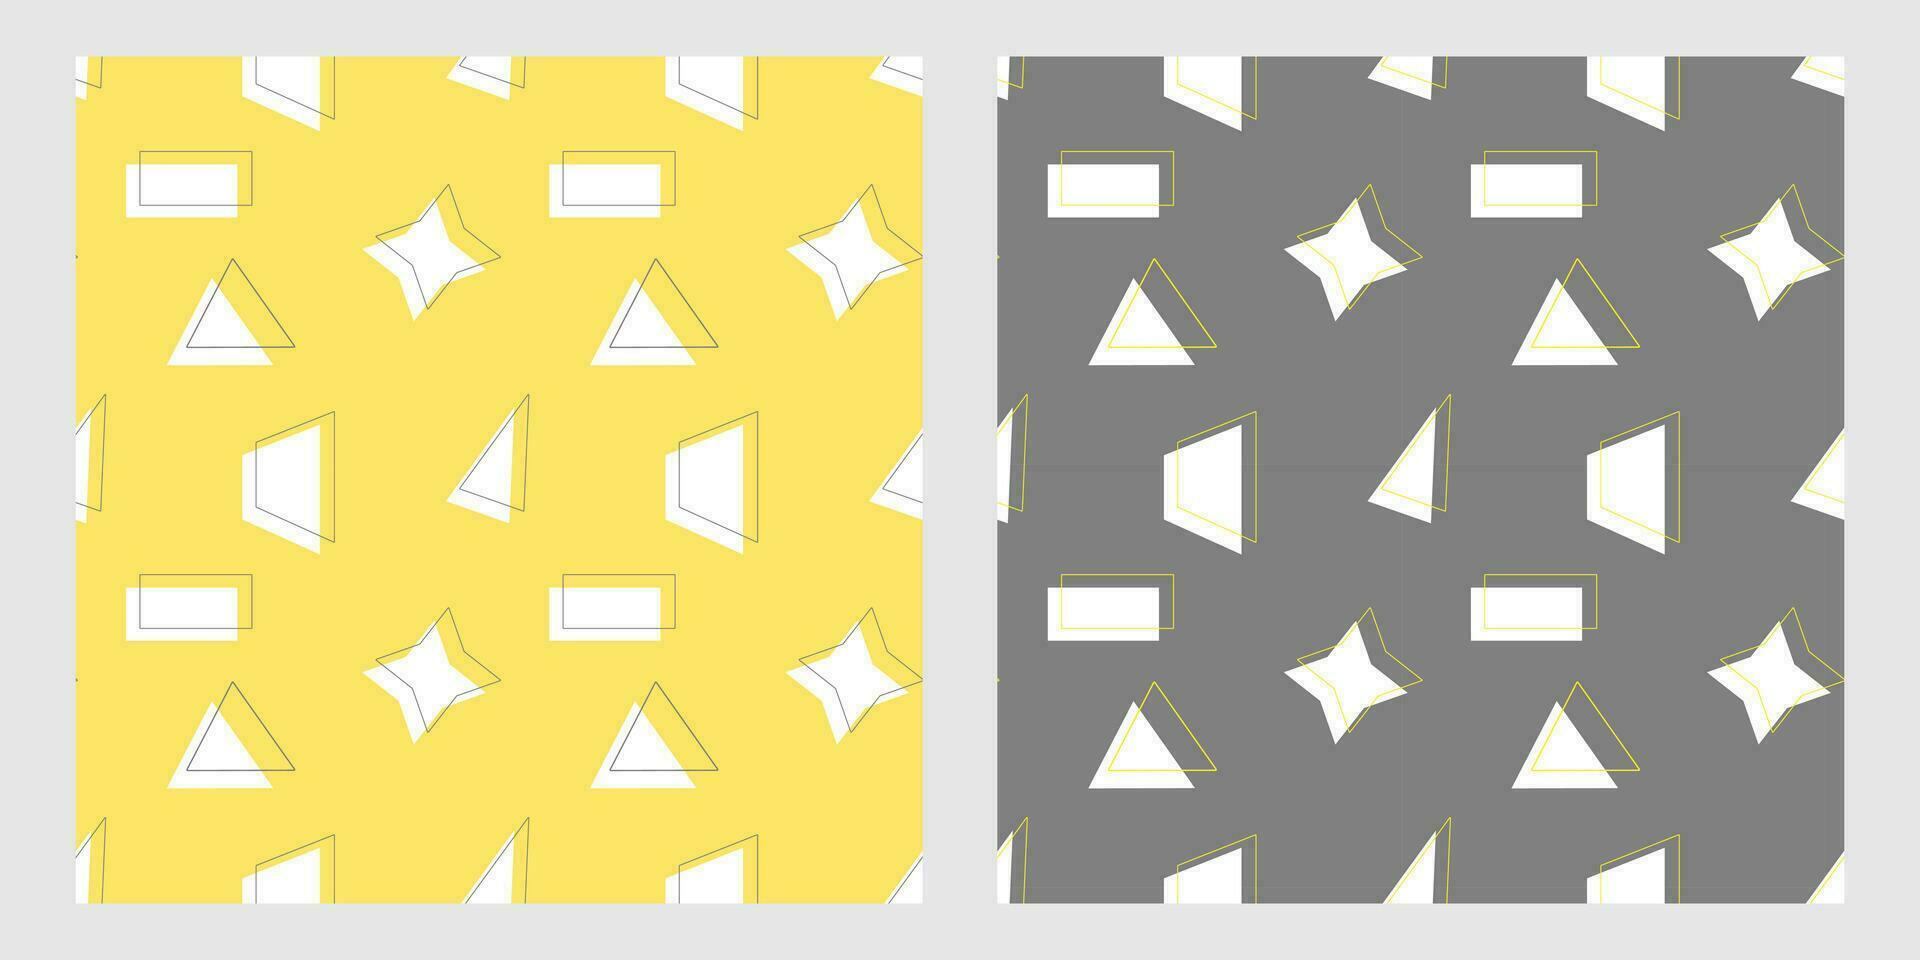 Geometric patterns with simple figures of triangle, trapezoid, rectangle, and their contours, on yellow and gray background. vector